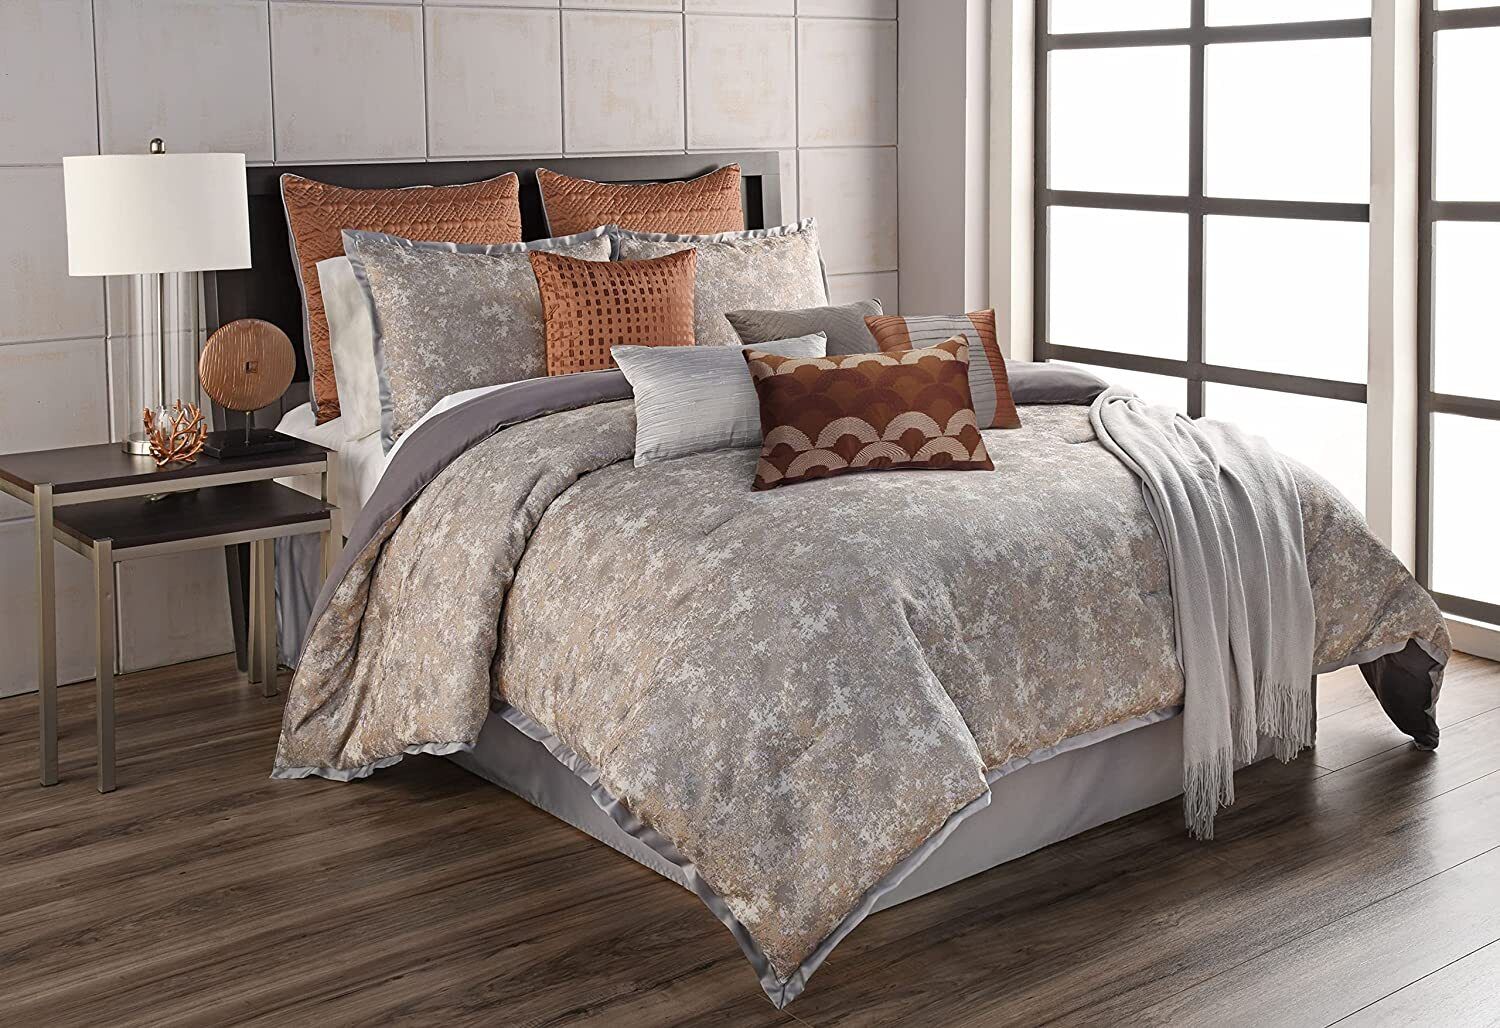 Riverbrook Home Elegant Collection Comforter Set, King, Aileen – Gray/Spice, ...